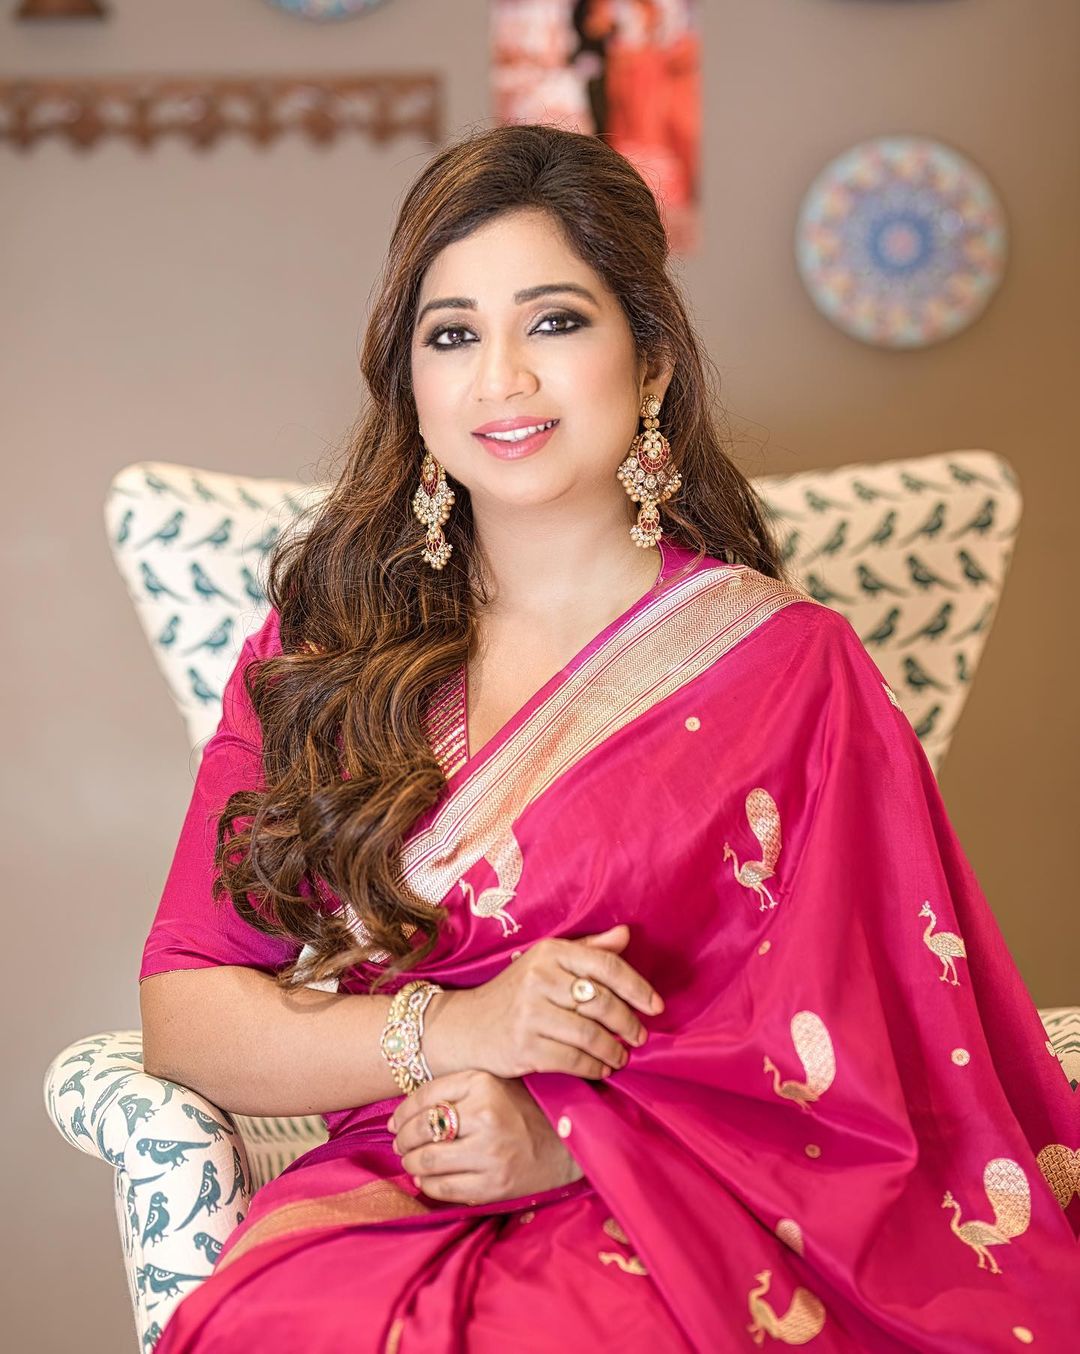 Shreya Ghoshal did the magic of beauty in a traditional saree look 9629